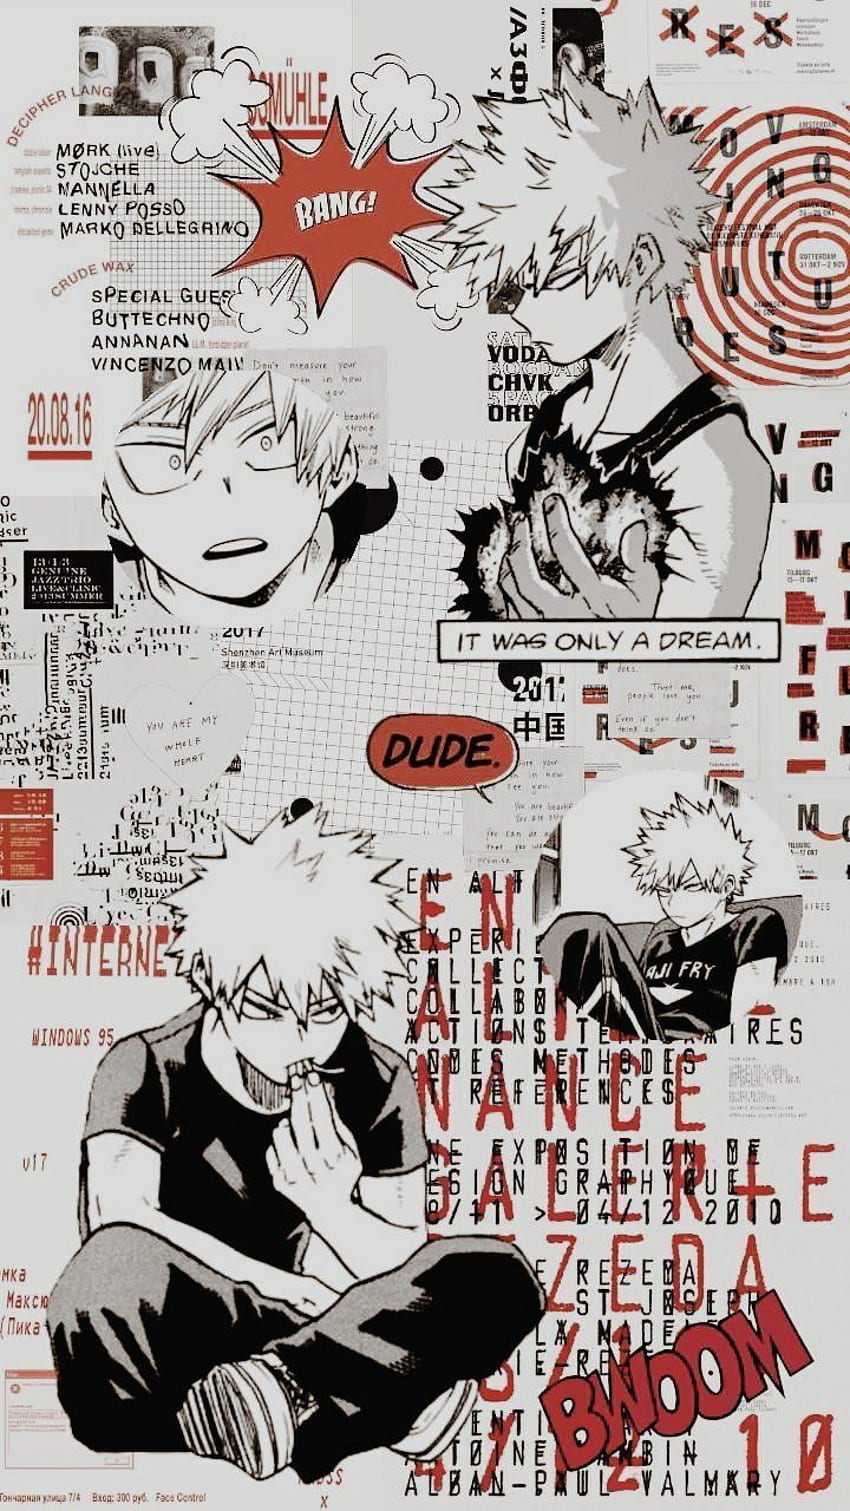 Aggregate more than 62 bakugou wallpaper aesthetic latest - in.cdgdbentre